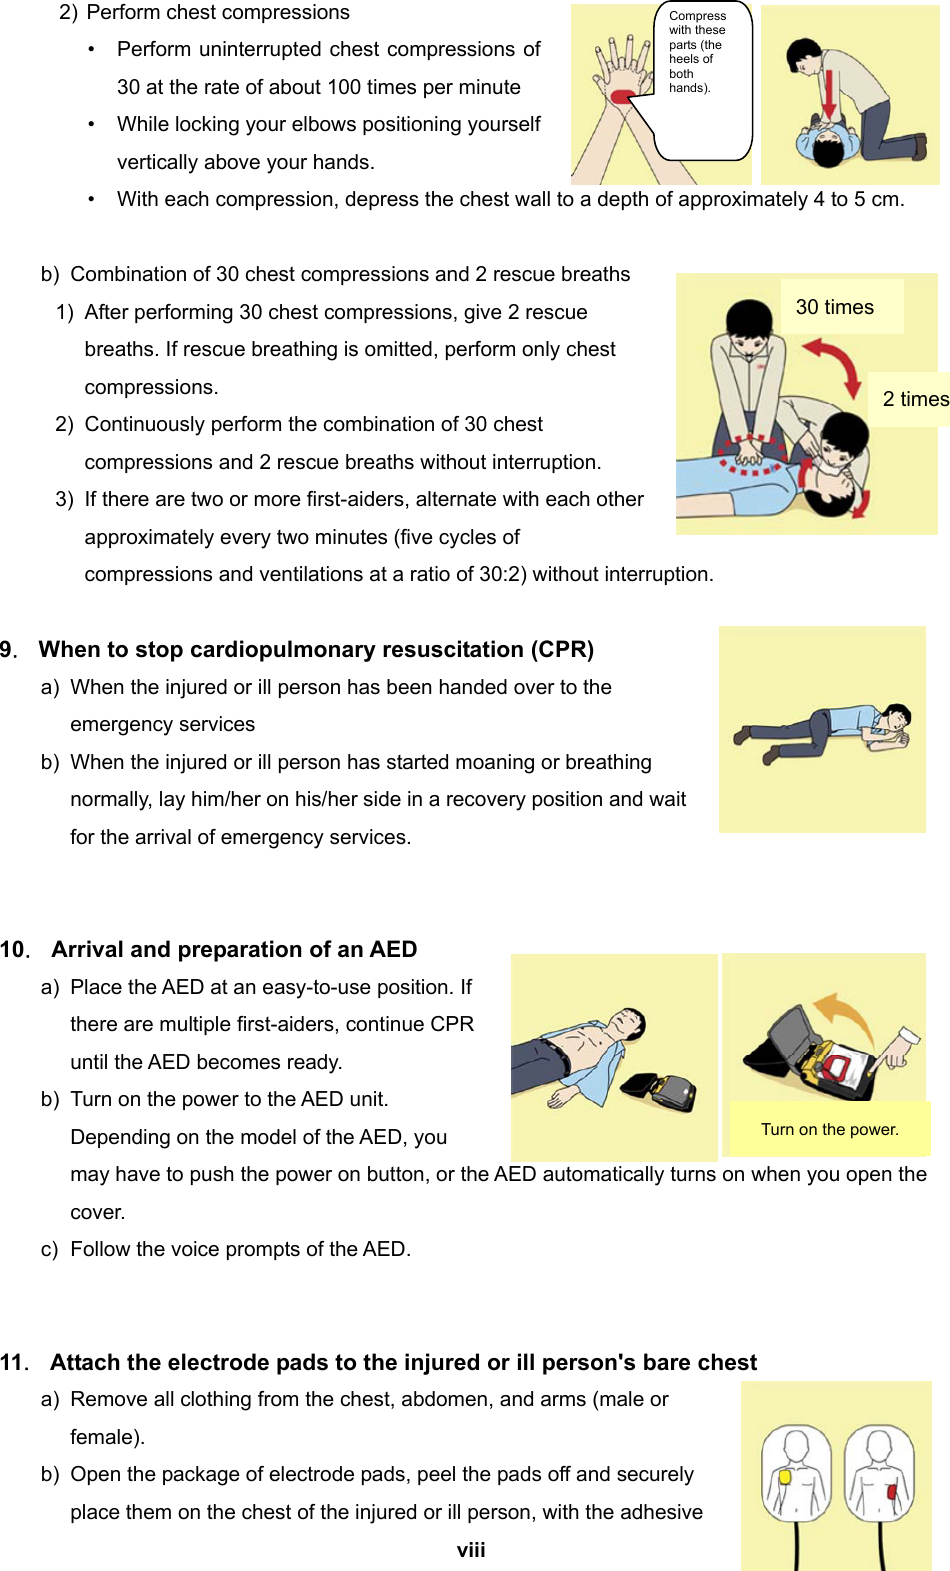  viii  2) Perform chest compressions •  Perform uninterrupted chest compressions of 30 at the rate of about 100 times per minute •  While locking your elbows positioning yourself vertically above your hands. •  With each compression, depress the chest wall to a depth of approximately 4 to 5 cm.  b)  Combination of 30 chest compressions and 2 rescue breaths 1)  After performing 30 chest compressions, give 2 rescue breaths. If rescue breathing is omitted, perform only chest compressions. 2)  Continuously perform the combination of 30 chest compressions and 2 rescue breaths without interruption. 3)  If there are two or more first-aiders, alternate with each other approximately every two minutes (five cycles of compressions and ventilations at a ratio of 30:2) without interruption.  9．  When to stop cardiopulmonary resuscitation (CPR) a)  When the injured or ill person has been handed over to the emergency services b)  When the injured or ill person has started moaning or breathing normally, lay him/her on his/her side in a recovery position and wait for the arrival of emergency services.   10．  Arrival and preparation of an AED a)  Place the AED at an easy-to-use position. If there are multiple first-aiders, continue CPR until the AED becomes ready. b)  Turn on the power to the AED unit. Depending on the model of the AED, you may have to push the power on button, or the AED automatically turns on when you open the cover. c)  Follow the voice prompts of the AED.   11．  Attach the electrode pads to the injured or ill person&apos;s bare chest   a)  Remove all clothing from the chest, abdomen, and arms (male or female).  b)  Open the package of electrode pads, peel the pads off and securely place them on the chest of the injured or ill person, with the adhesive 30 times Compress with these parts (the heels of both hands). 2 times Turn on the power. 